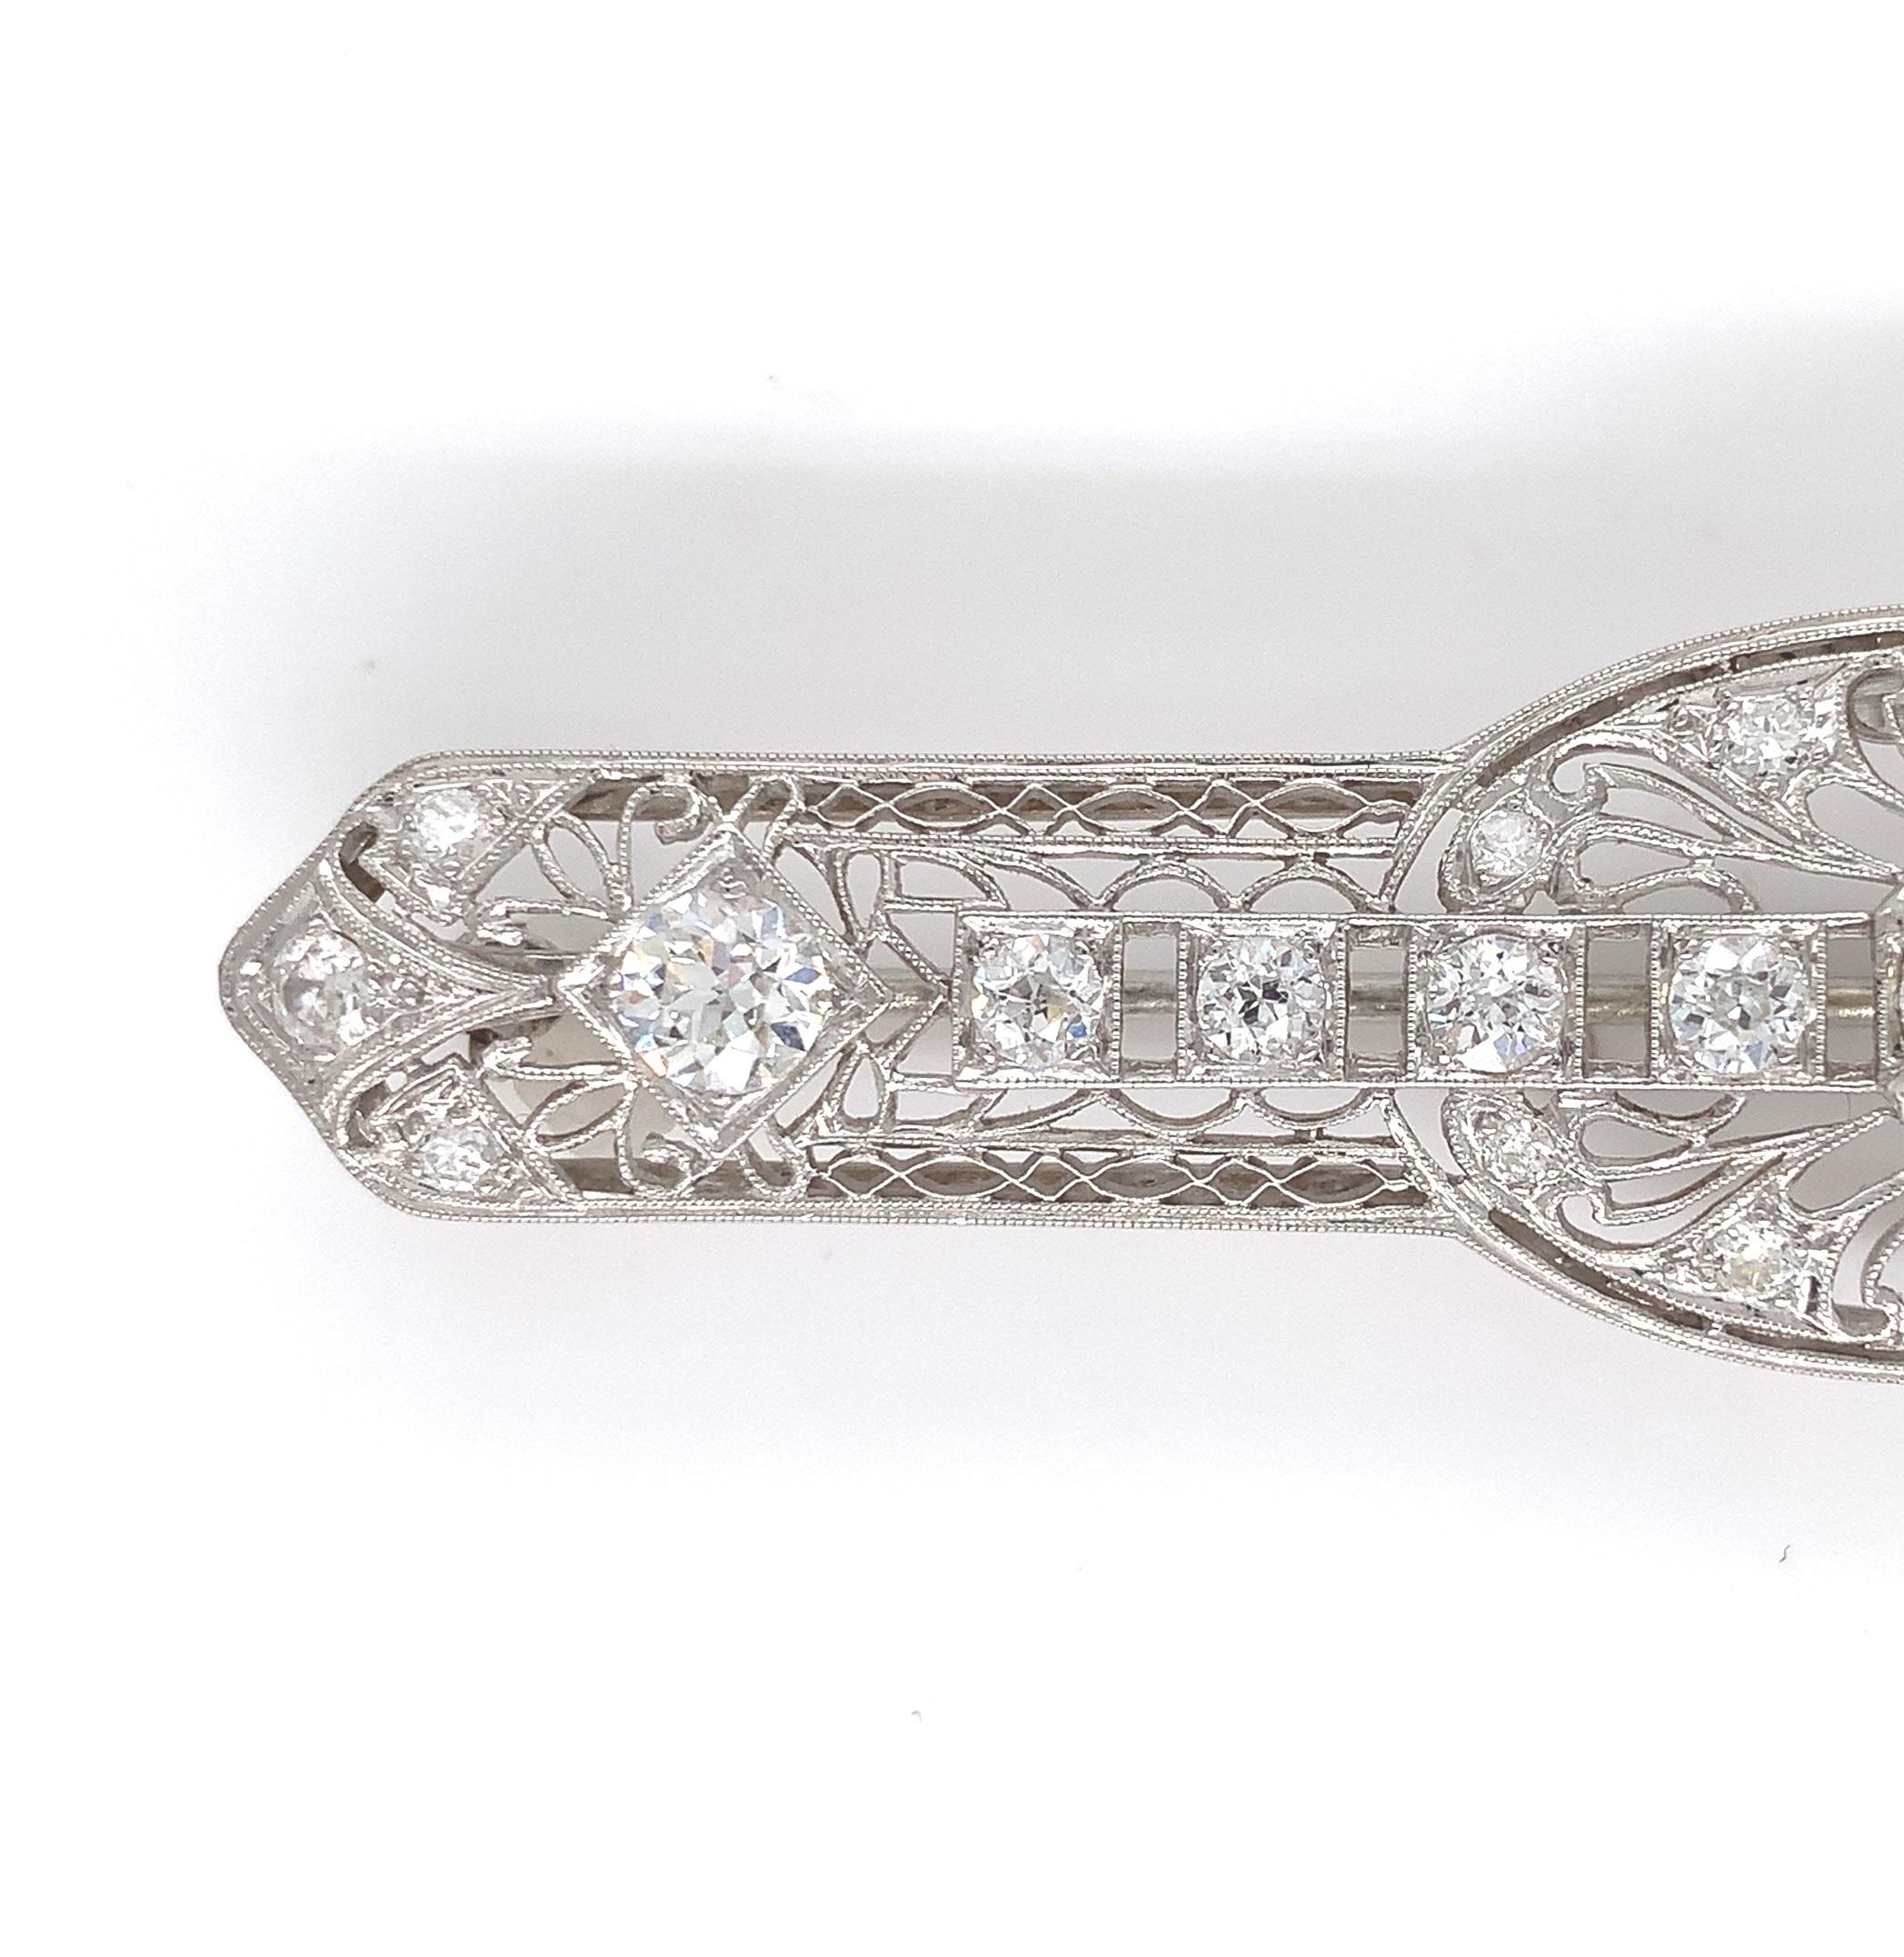  Art Deco platinum diamond filigree pin brooch with just over 3 carats of diamonds. This is a large substantial pin measuring 3 1/8